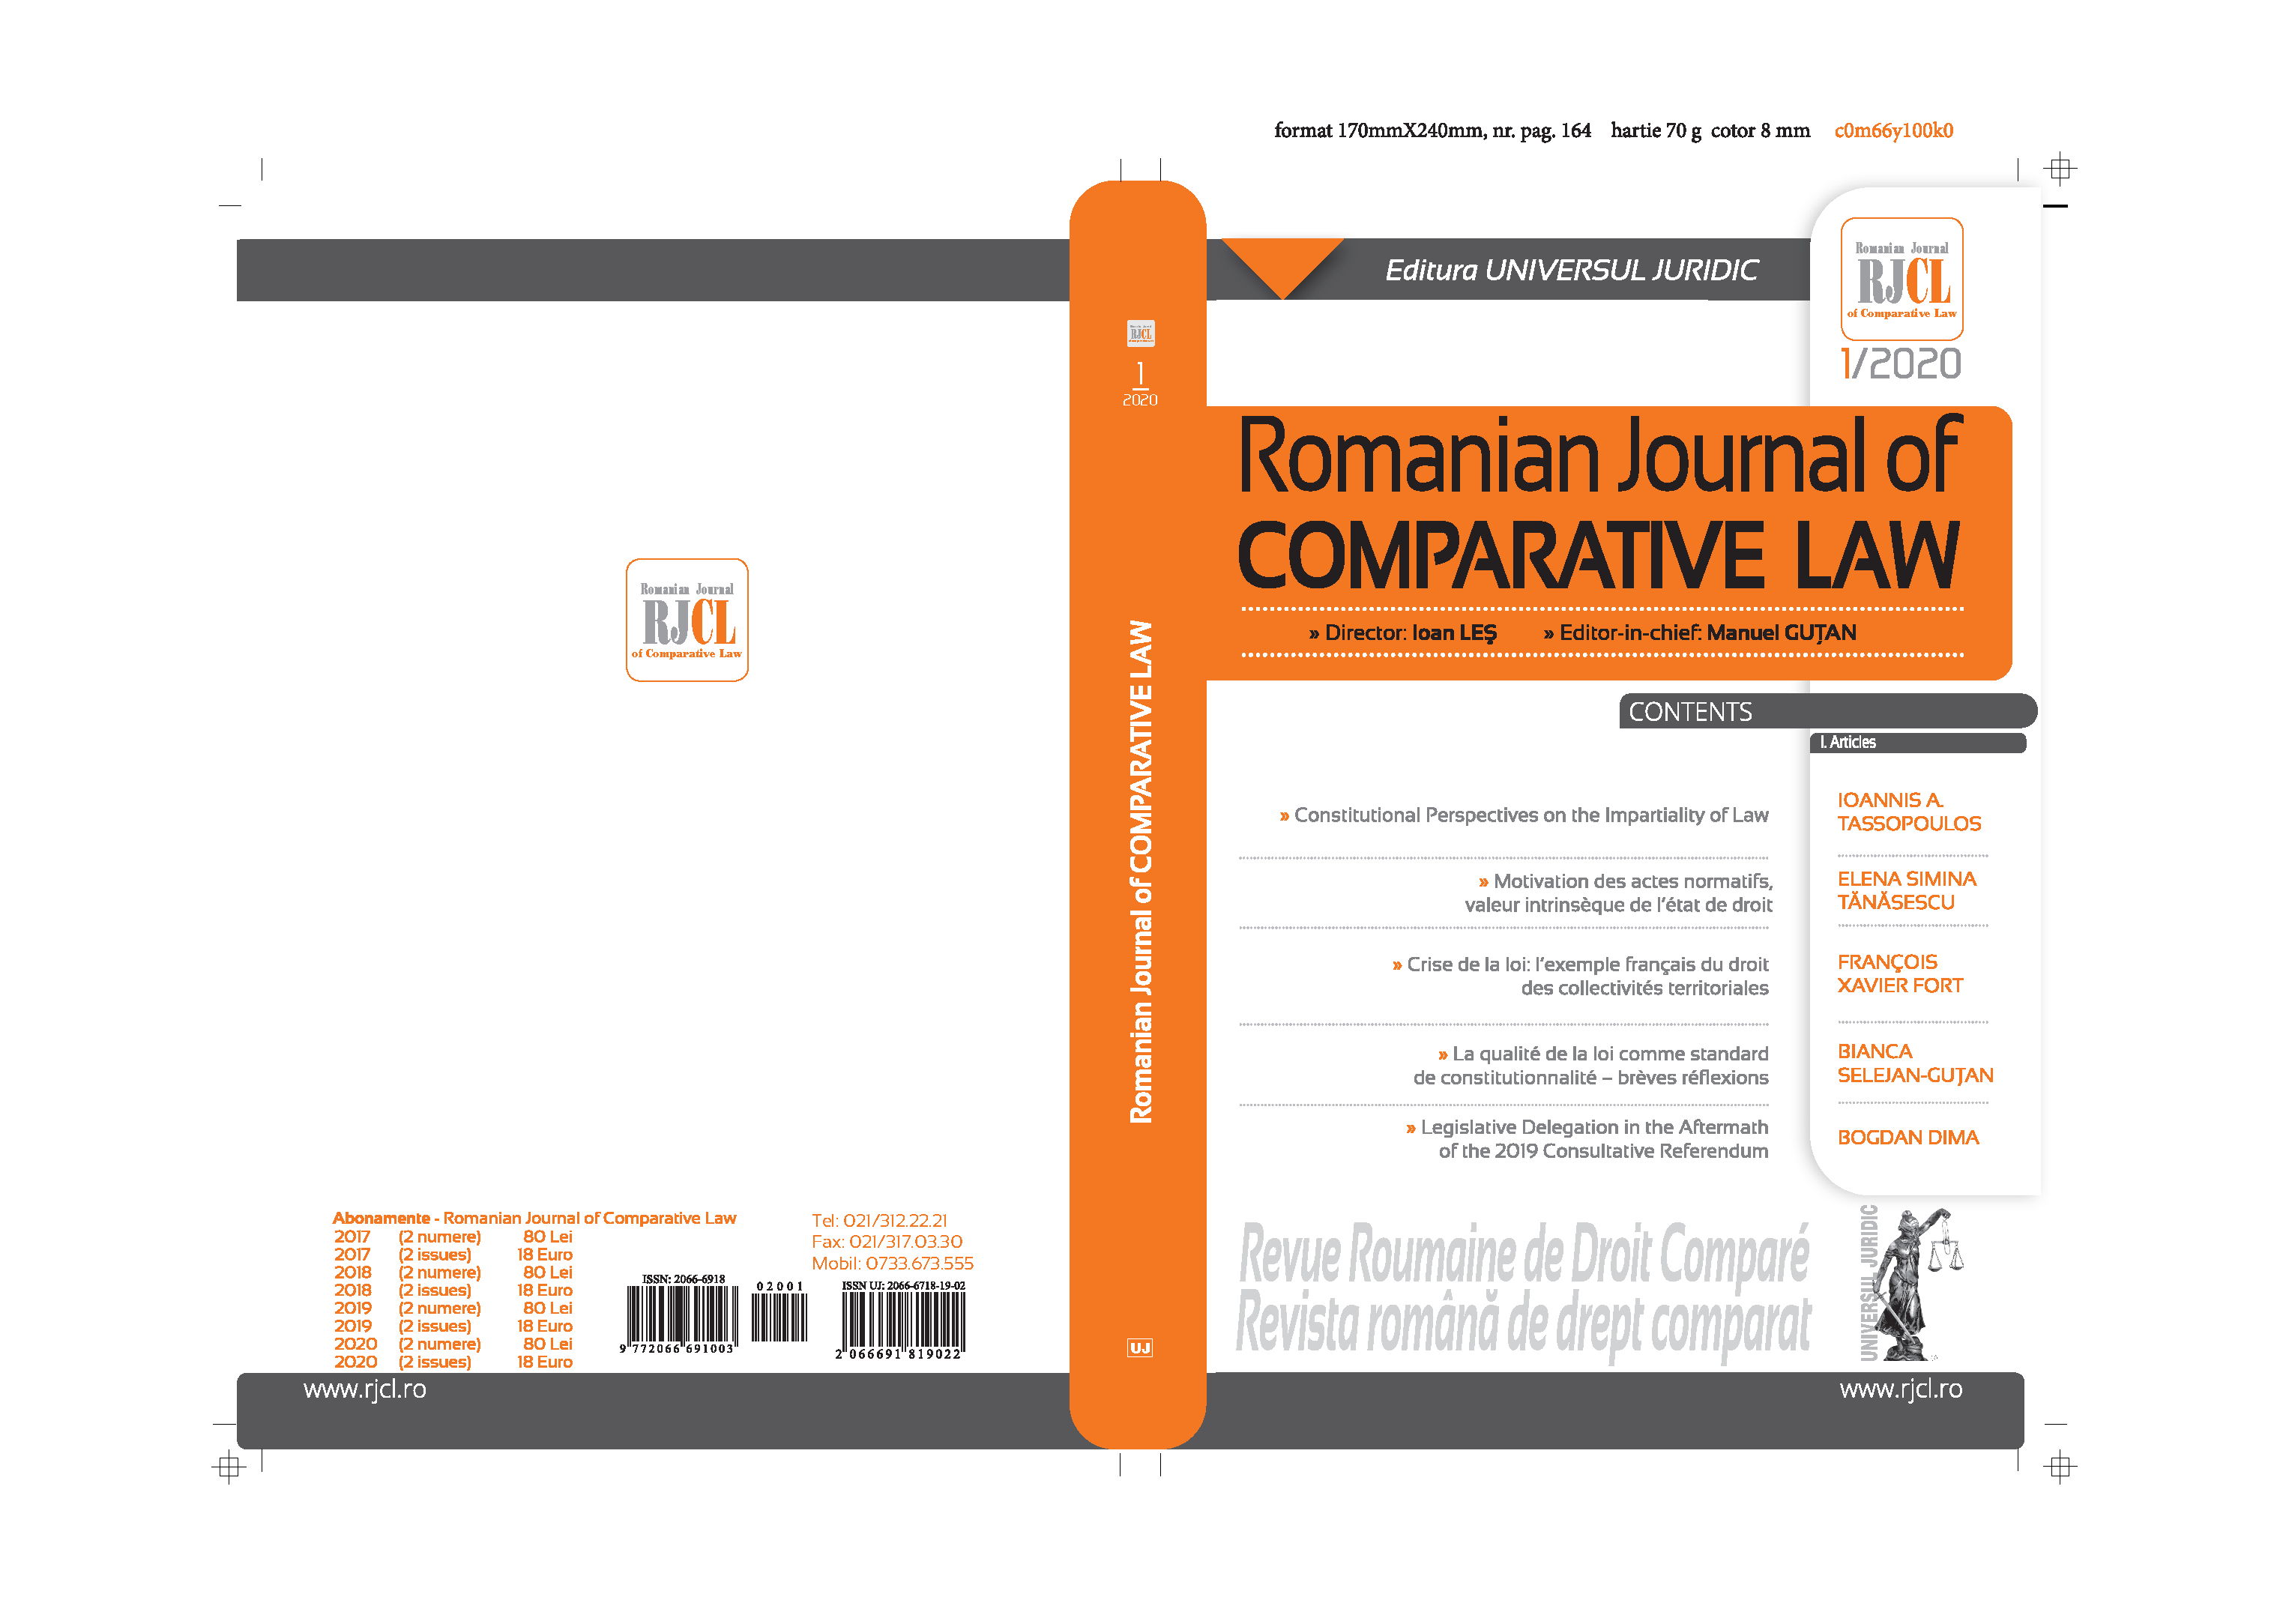 Constitutional Perspectives on the Impartiality of Law Cover Image